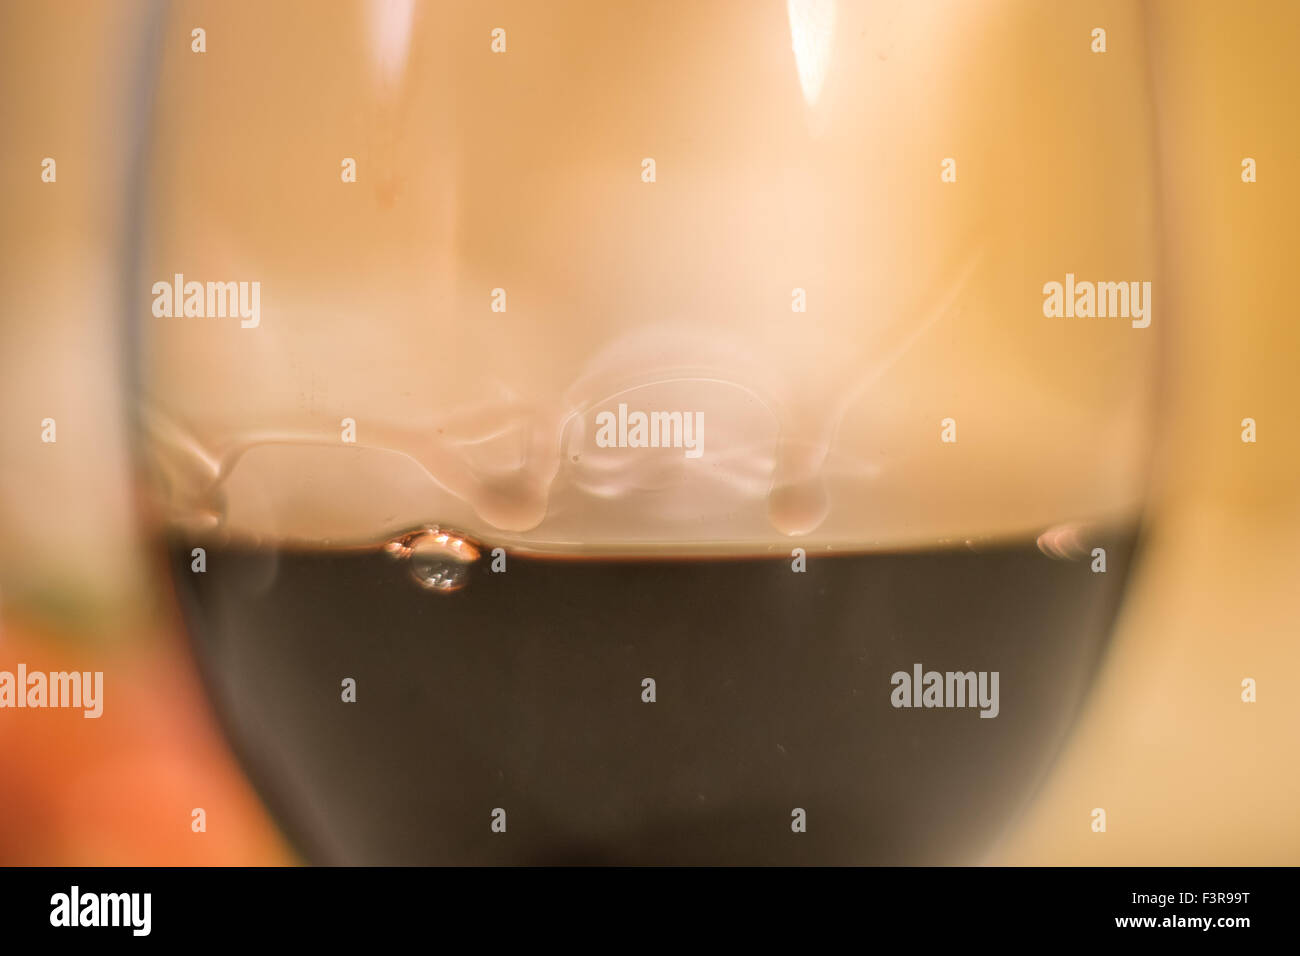 cup of wine with water droplets formed by the surface tension of alcohol Stock Photo